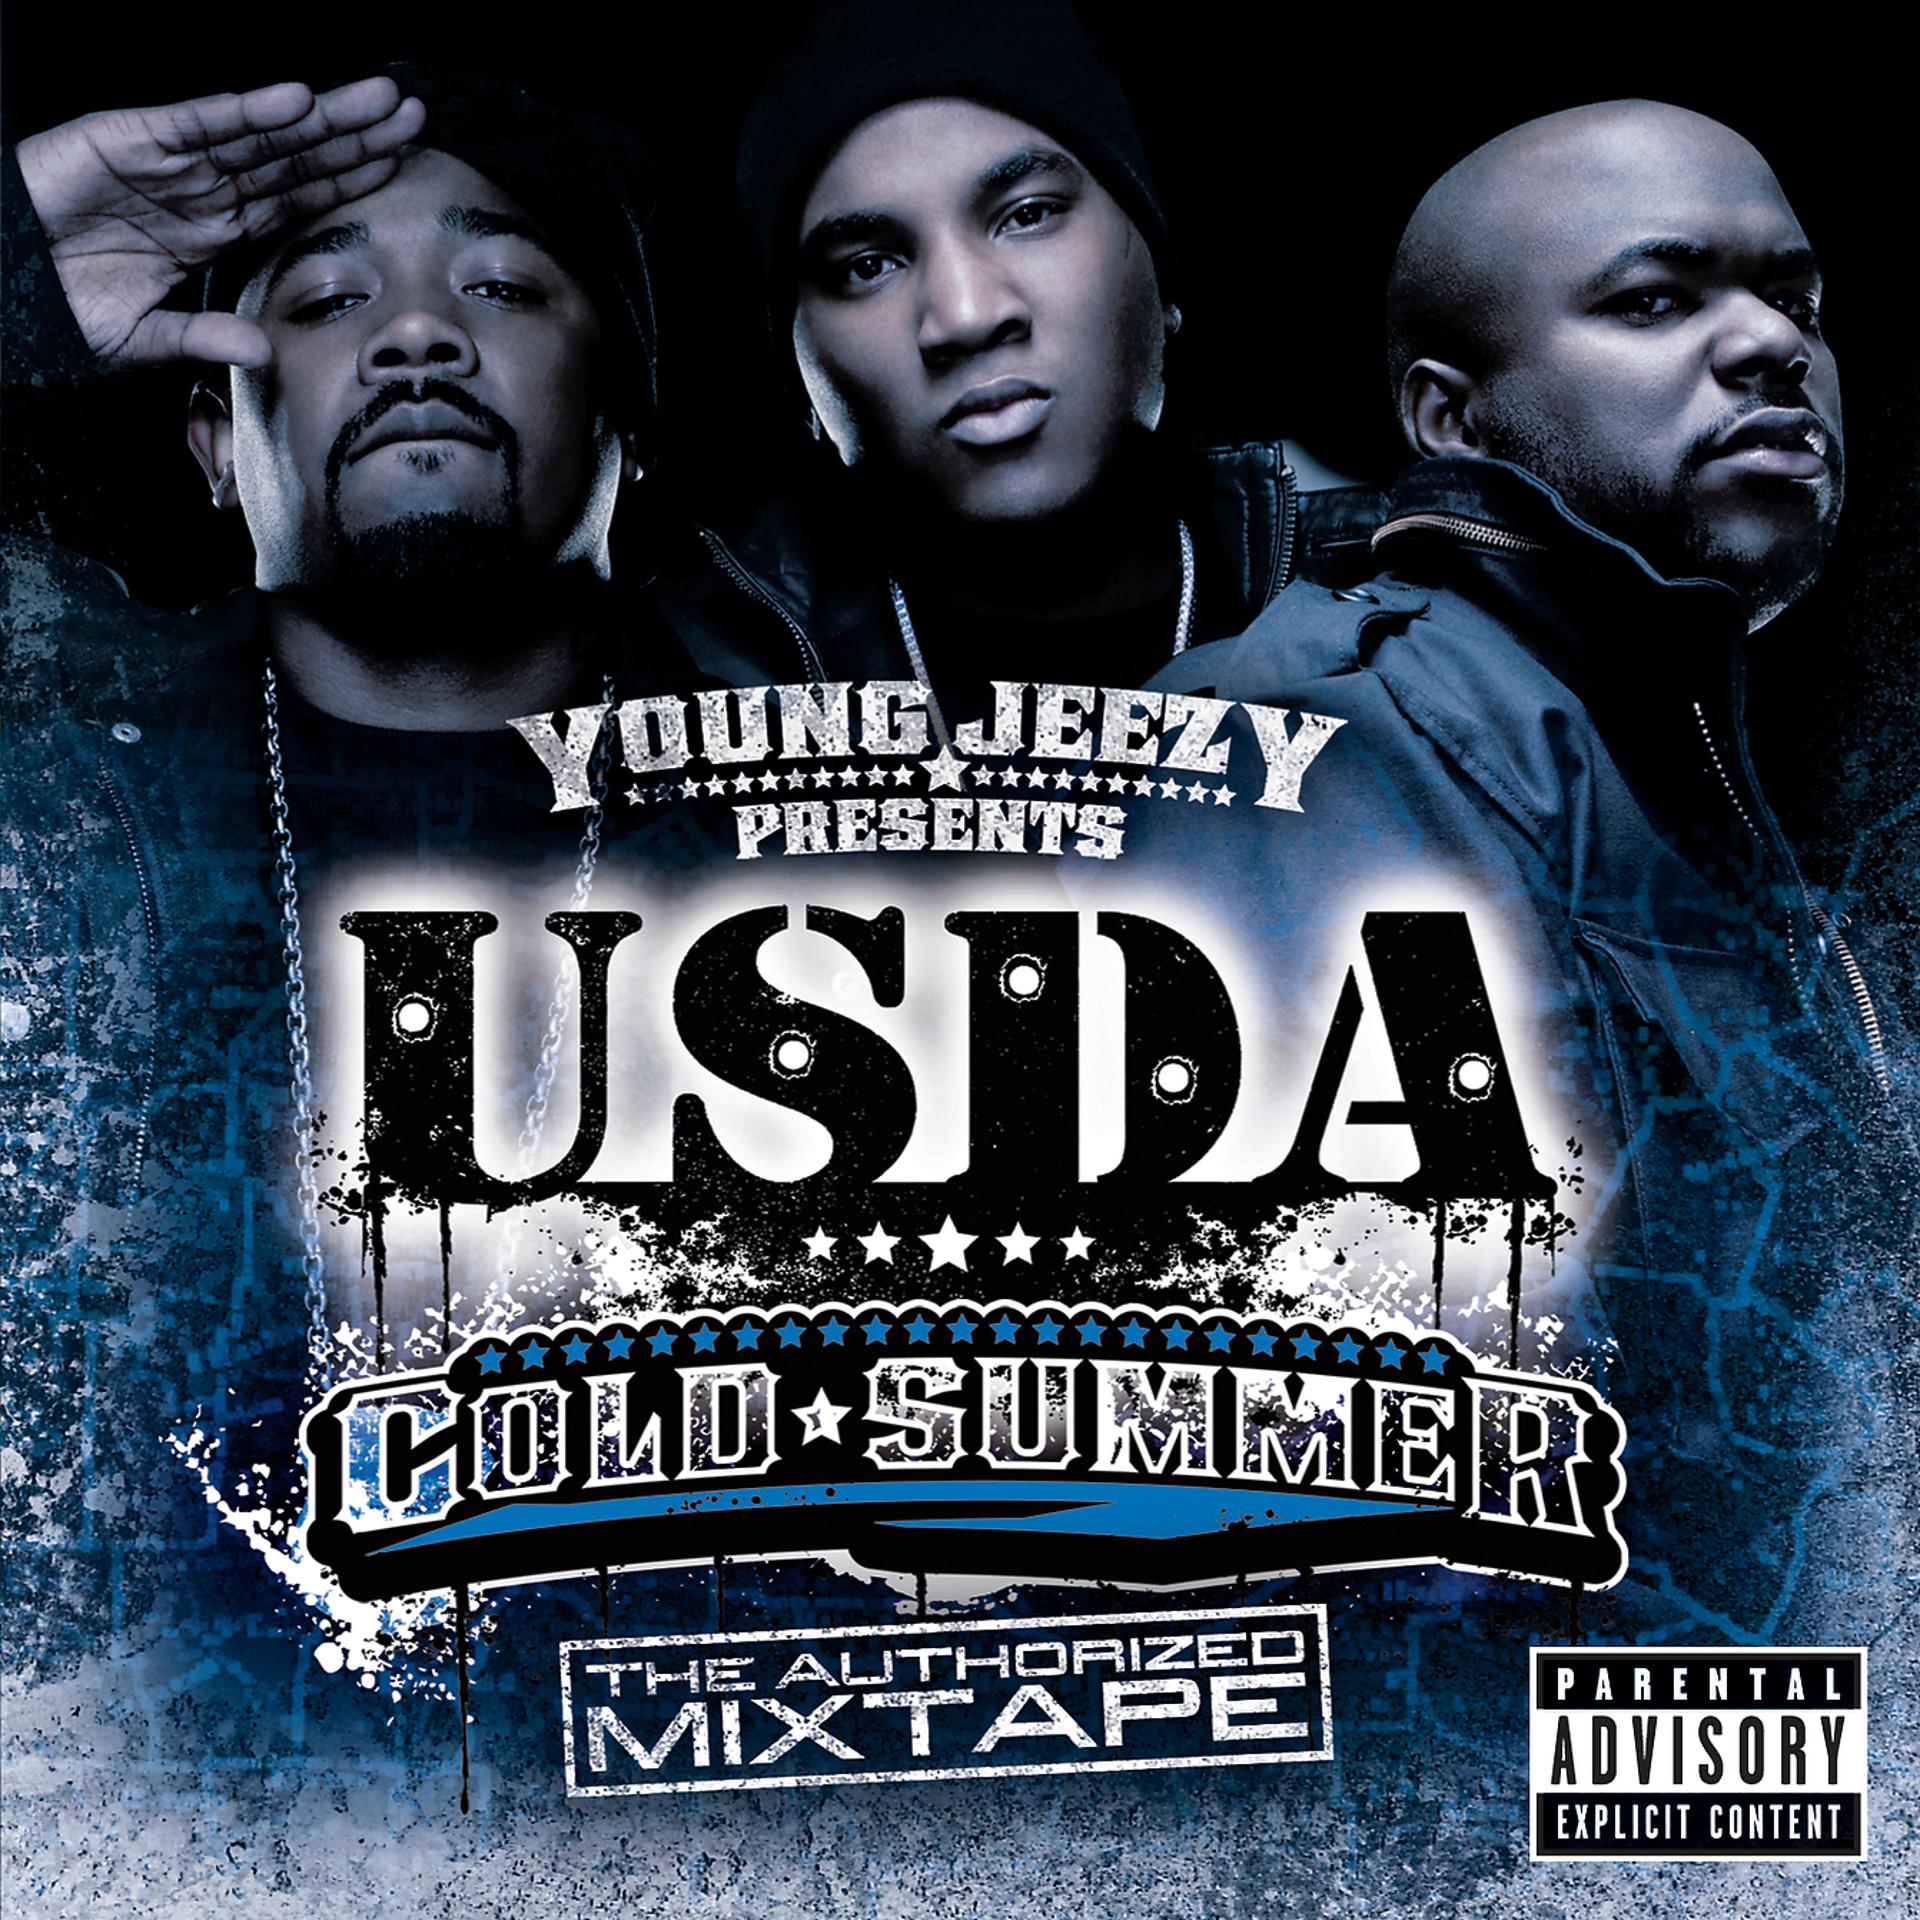 Постер альбома Young Jeezy Presents U.S.D.A.: "Cold Summer" The Authorized Mixtape